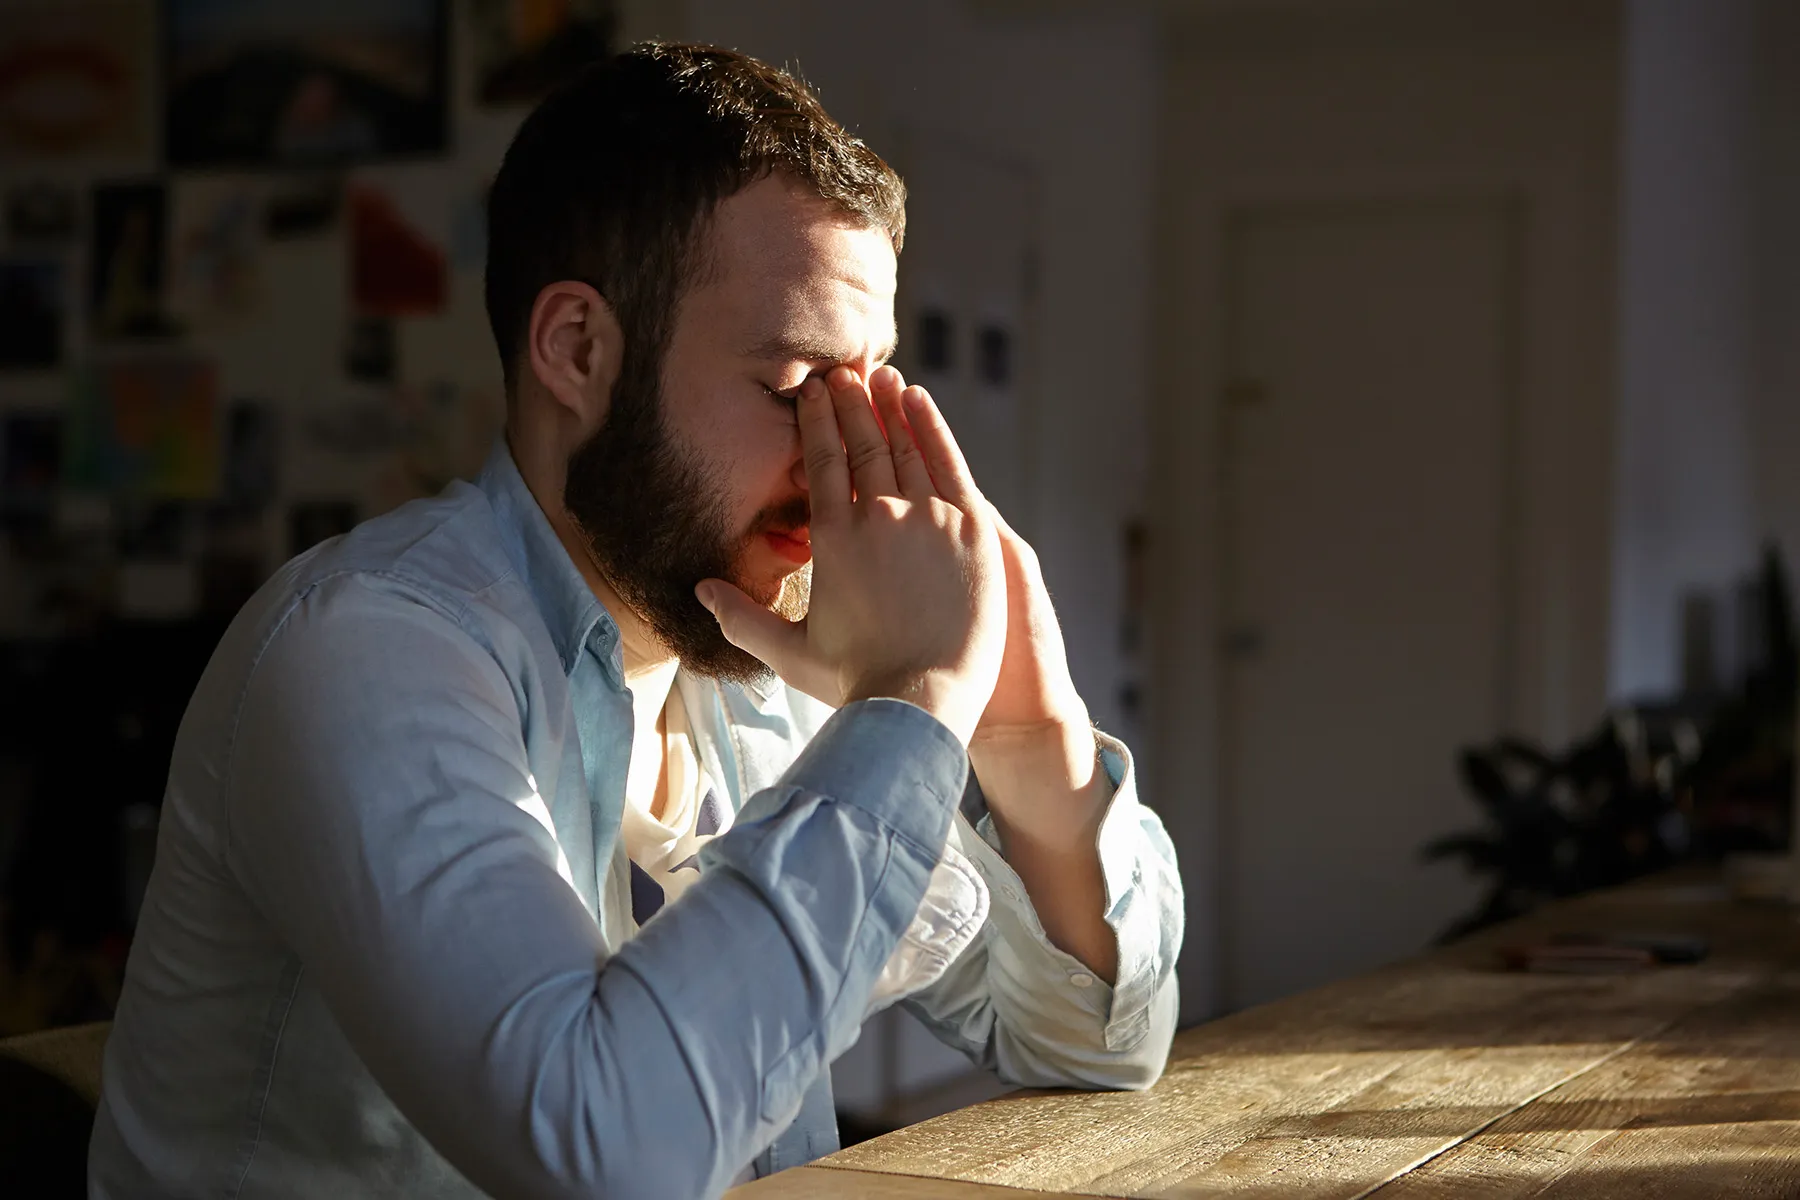 photo of anxious man sitting at kitchen table